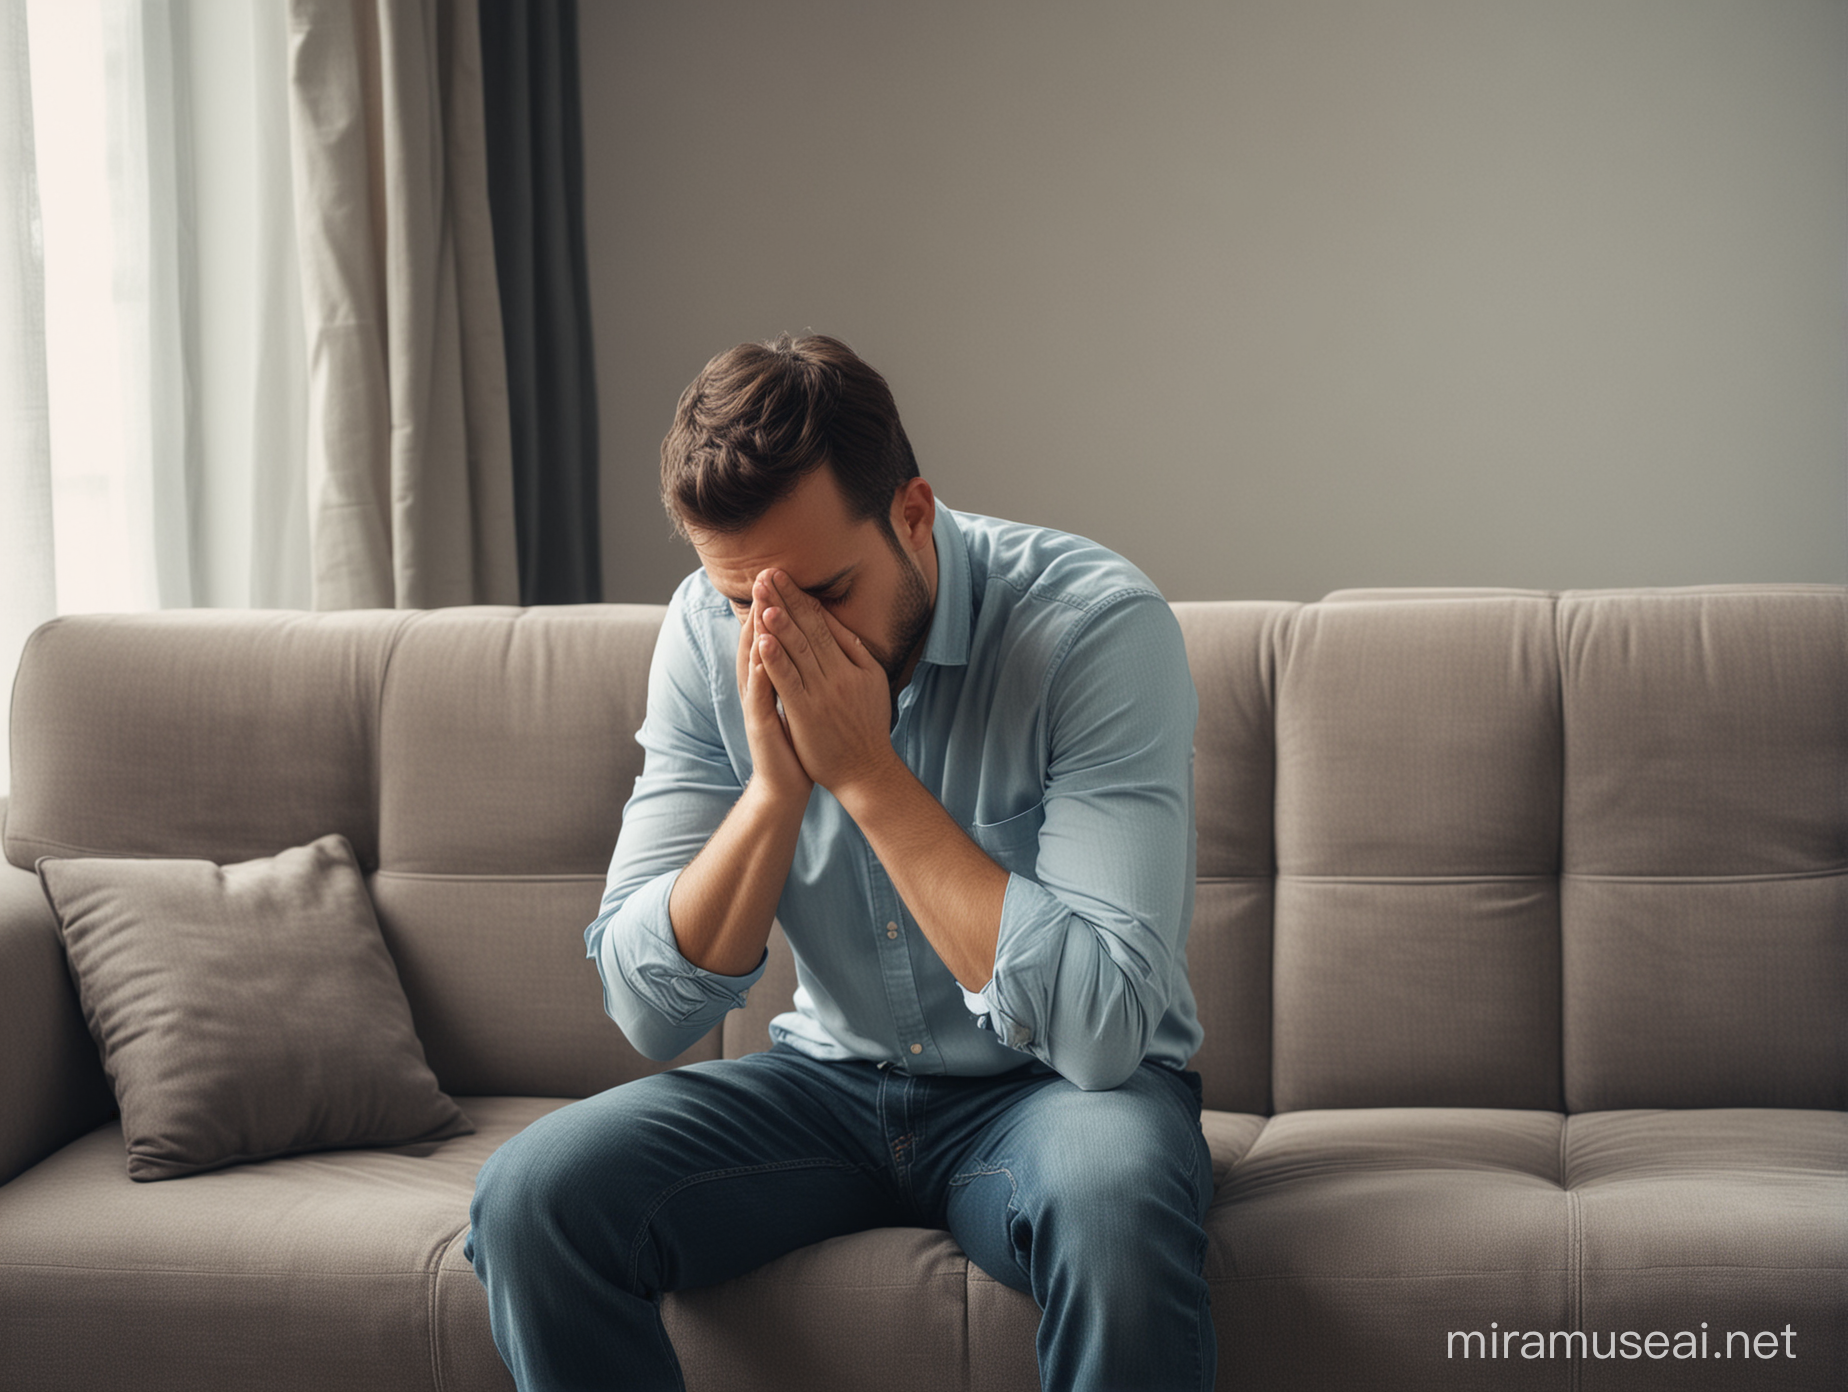 Lonely Man Seeking Solace in Prayer on Sofa